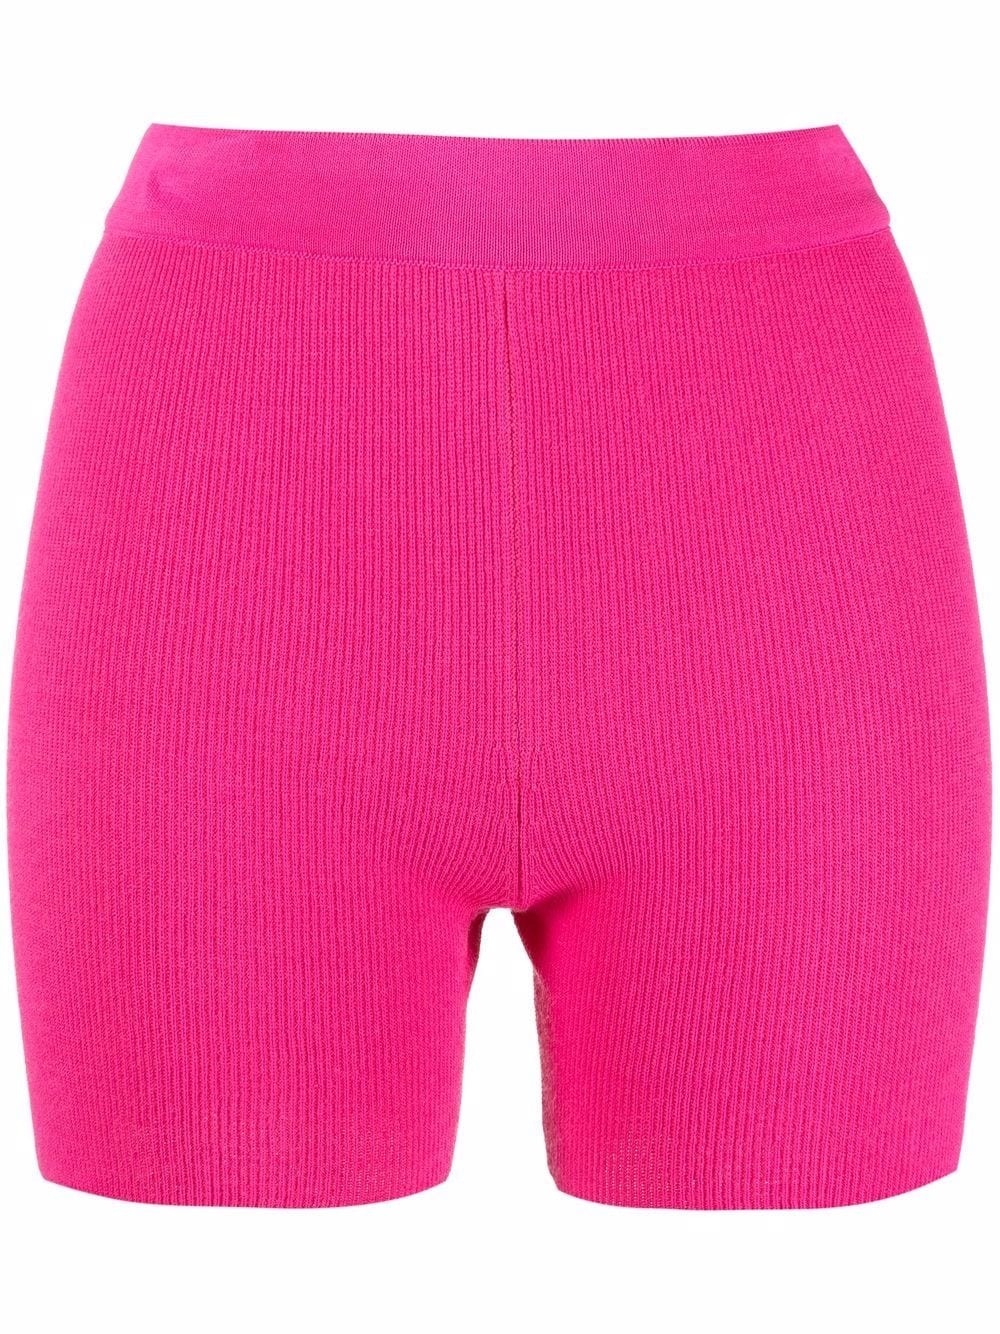 fine-ribbed knitted cycling shorts - 1